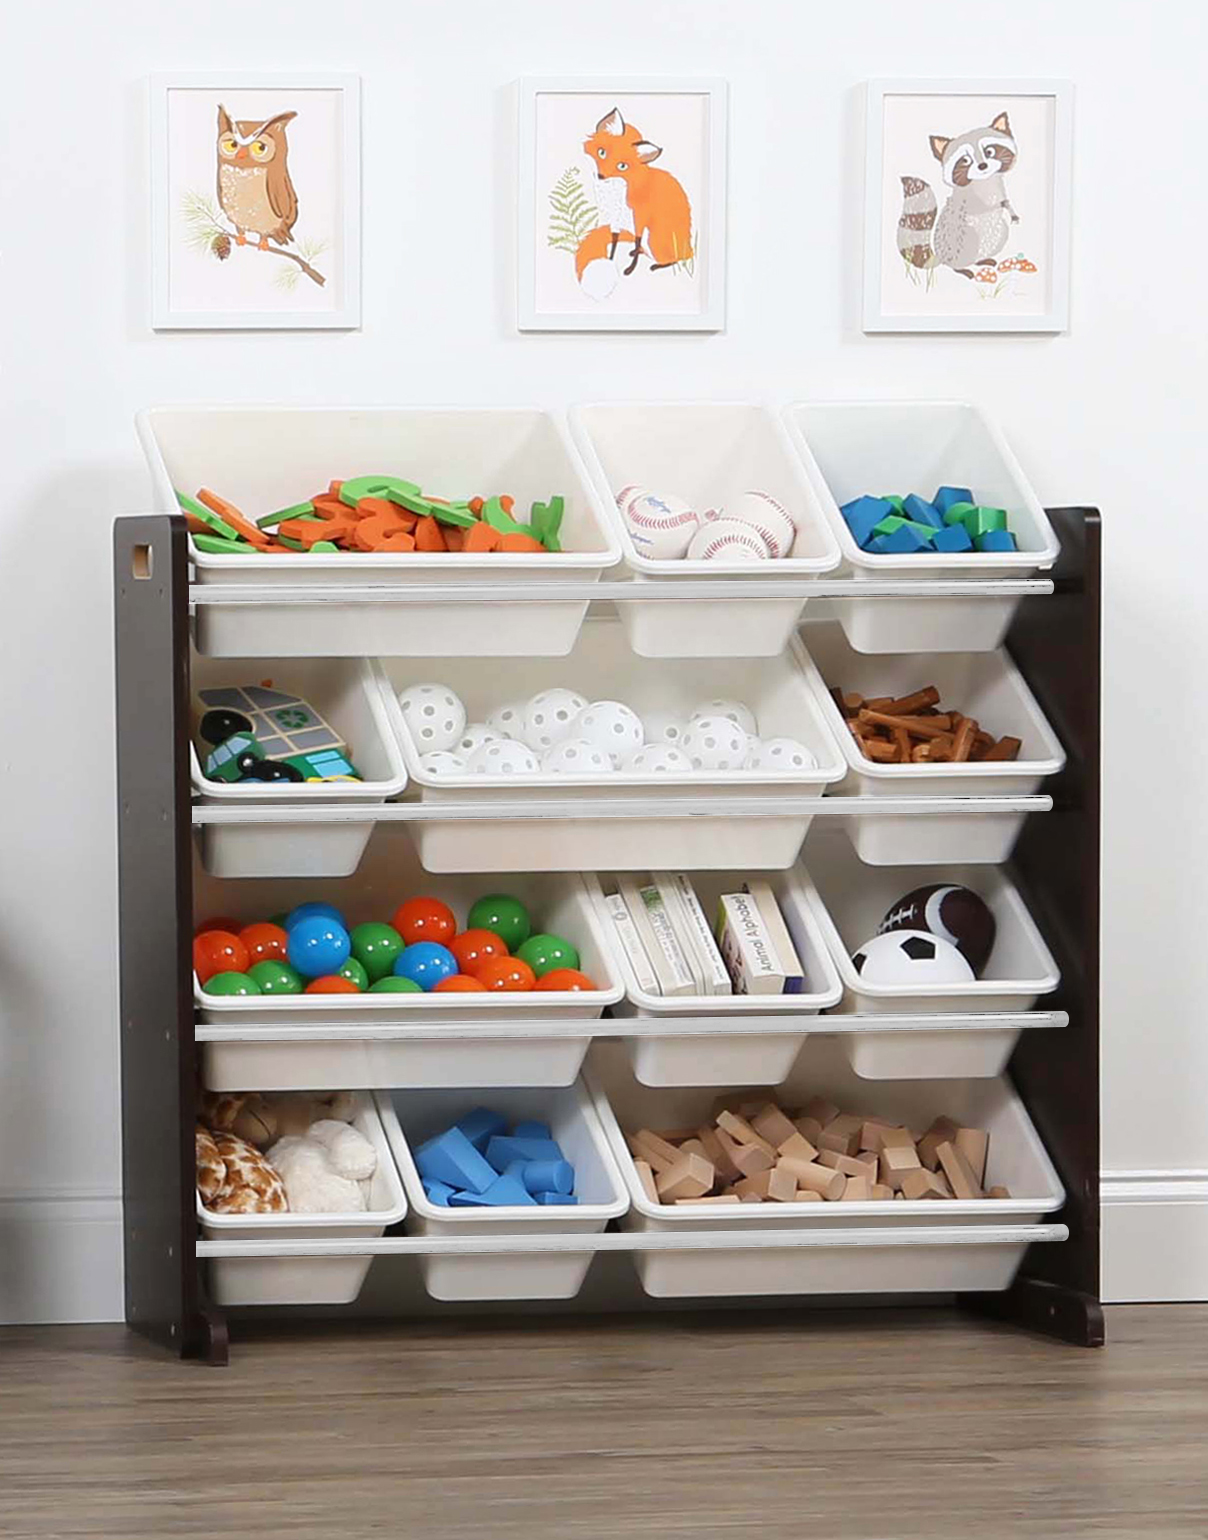 Humble Crew Children Plastic Organizing Rack with 12 Bins, Espresso and White - image 5 of 9